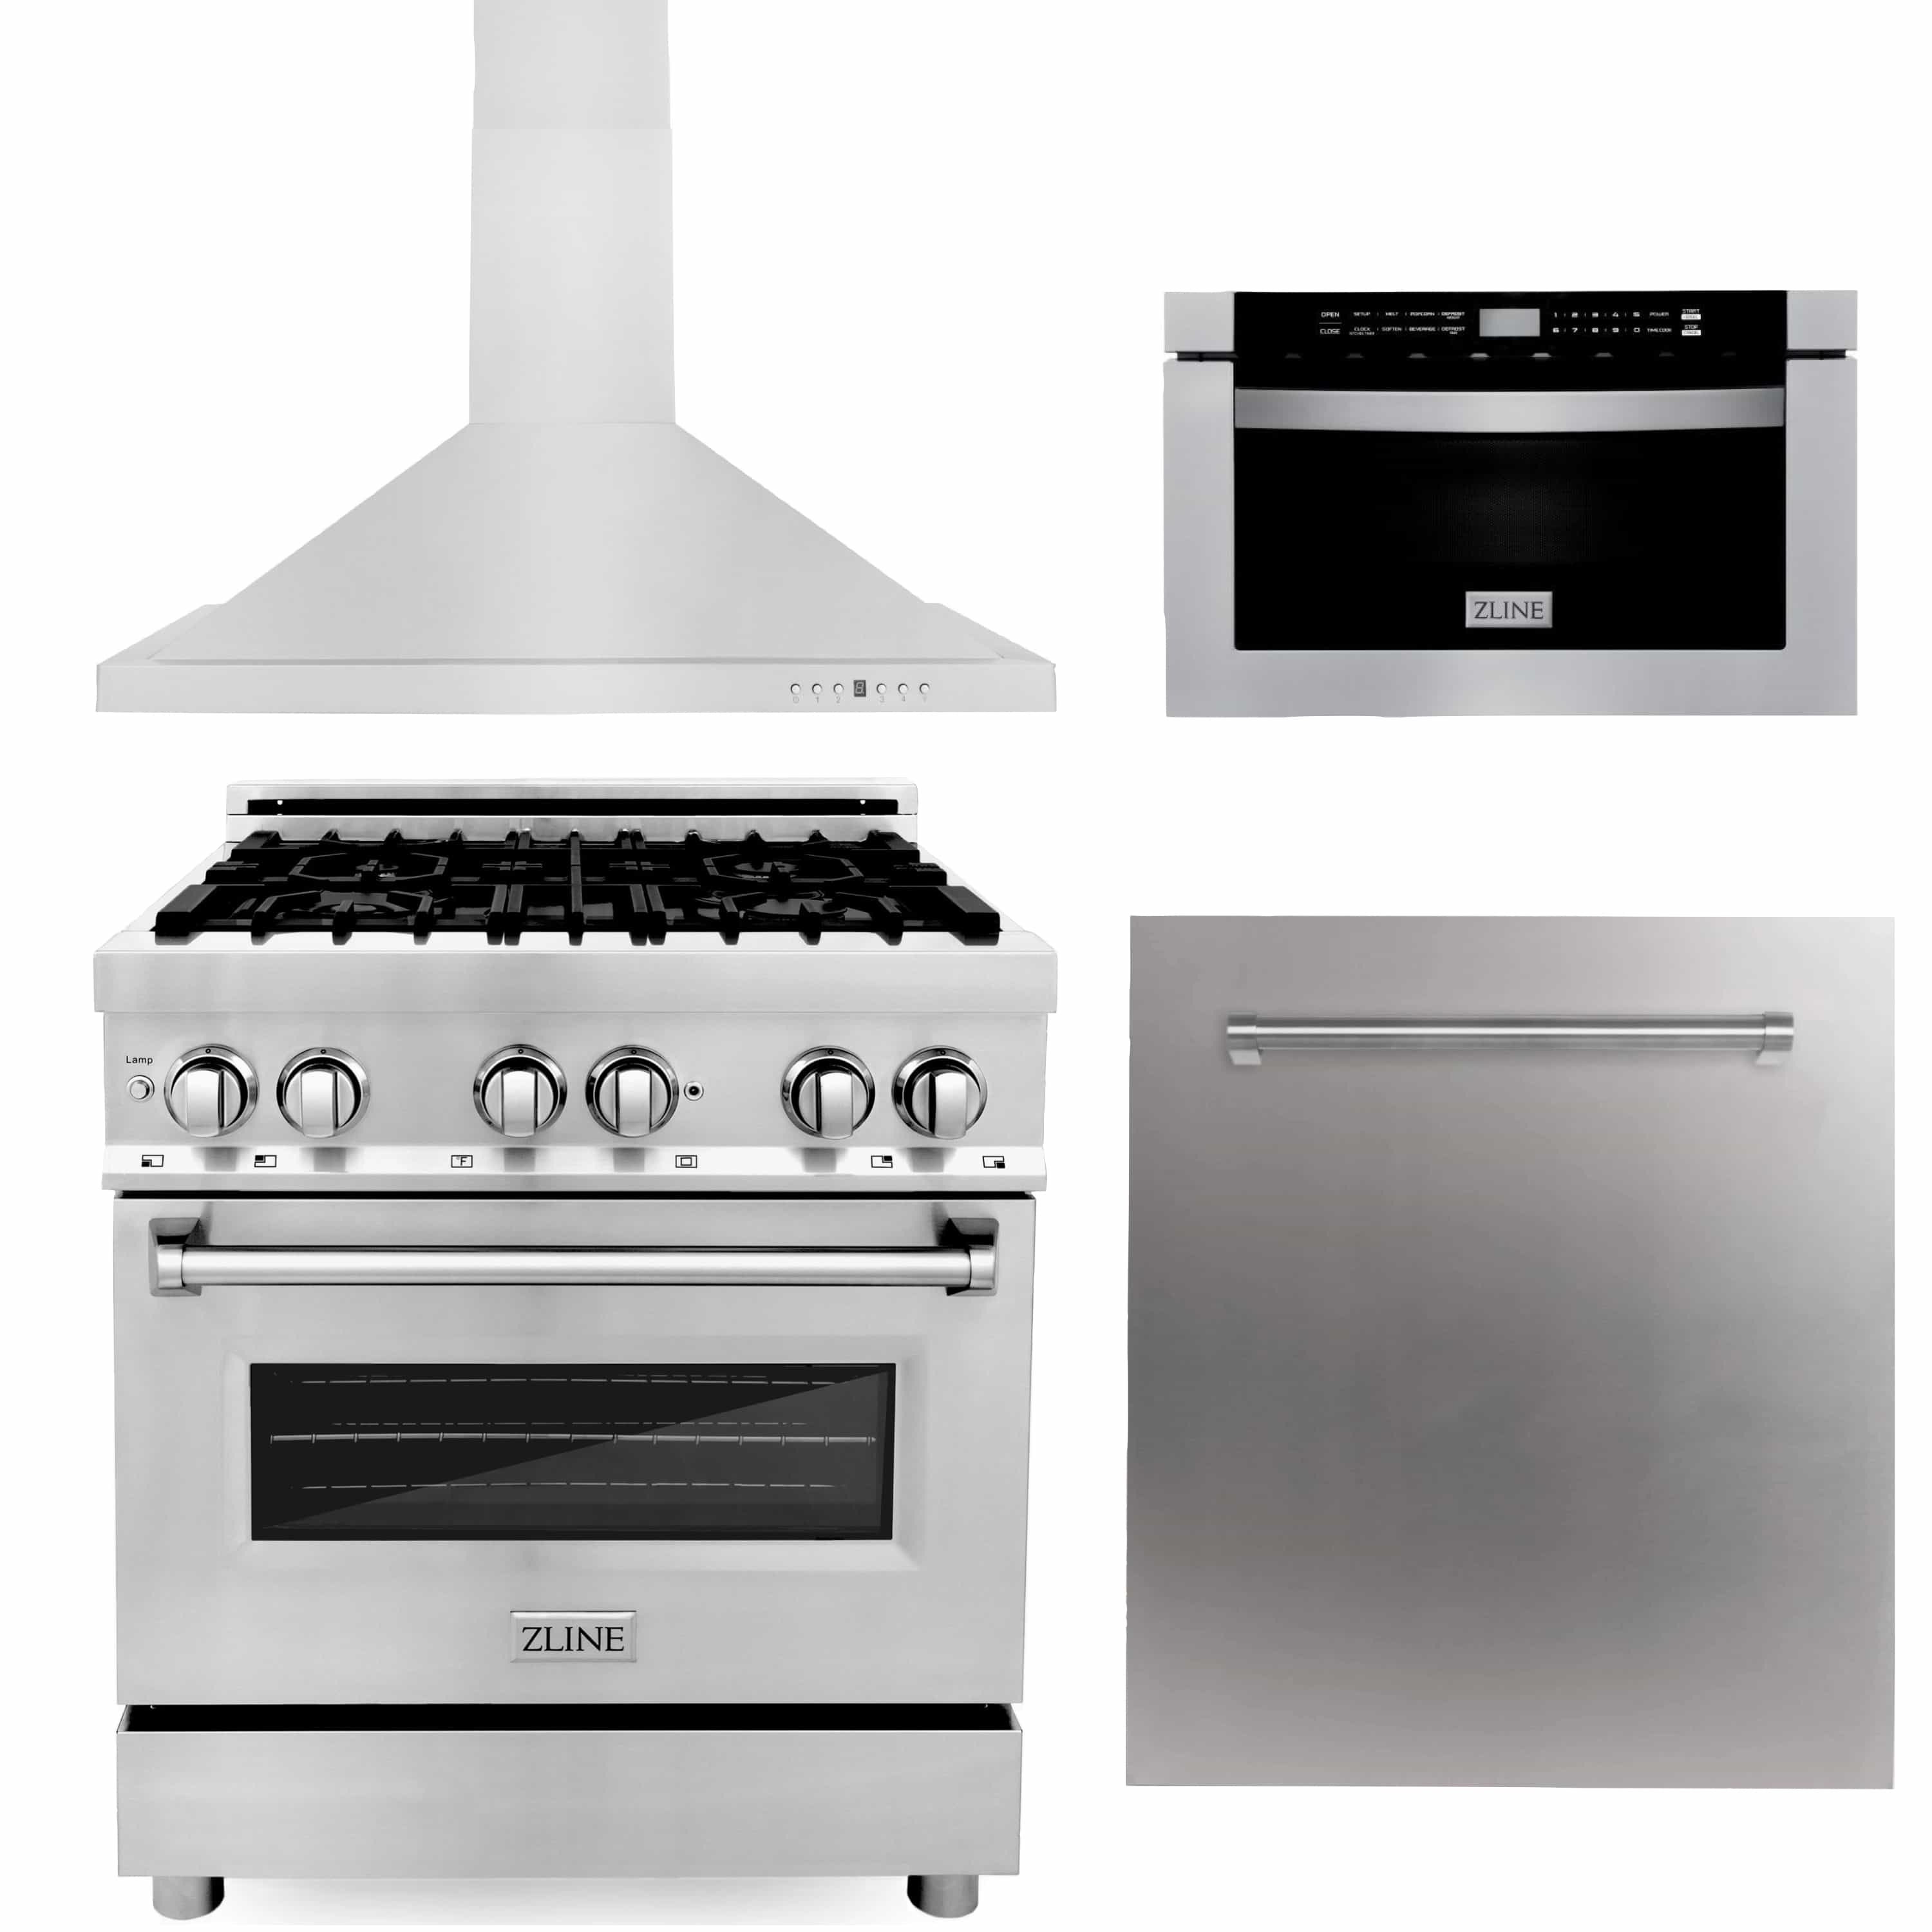 https://cdn.shopify.com/s/files/1/0099/2251/0926/products/zline-4-piece-appliance-package-30-inch-dual-fuel-range-stainless-steel-dishwasher-microwave-drawer-premium-hood-4kp-rarh30-mwdw-appliance-package-zline-homeoutletdirect-337162.jpg?v=1667613430